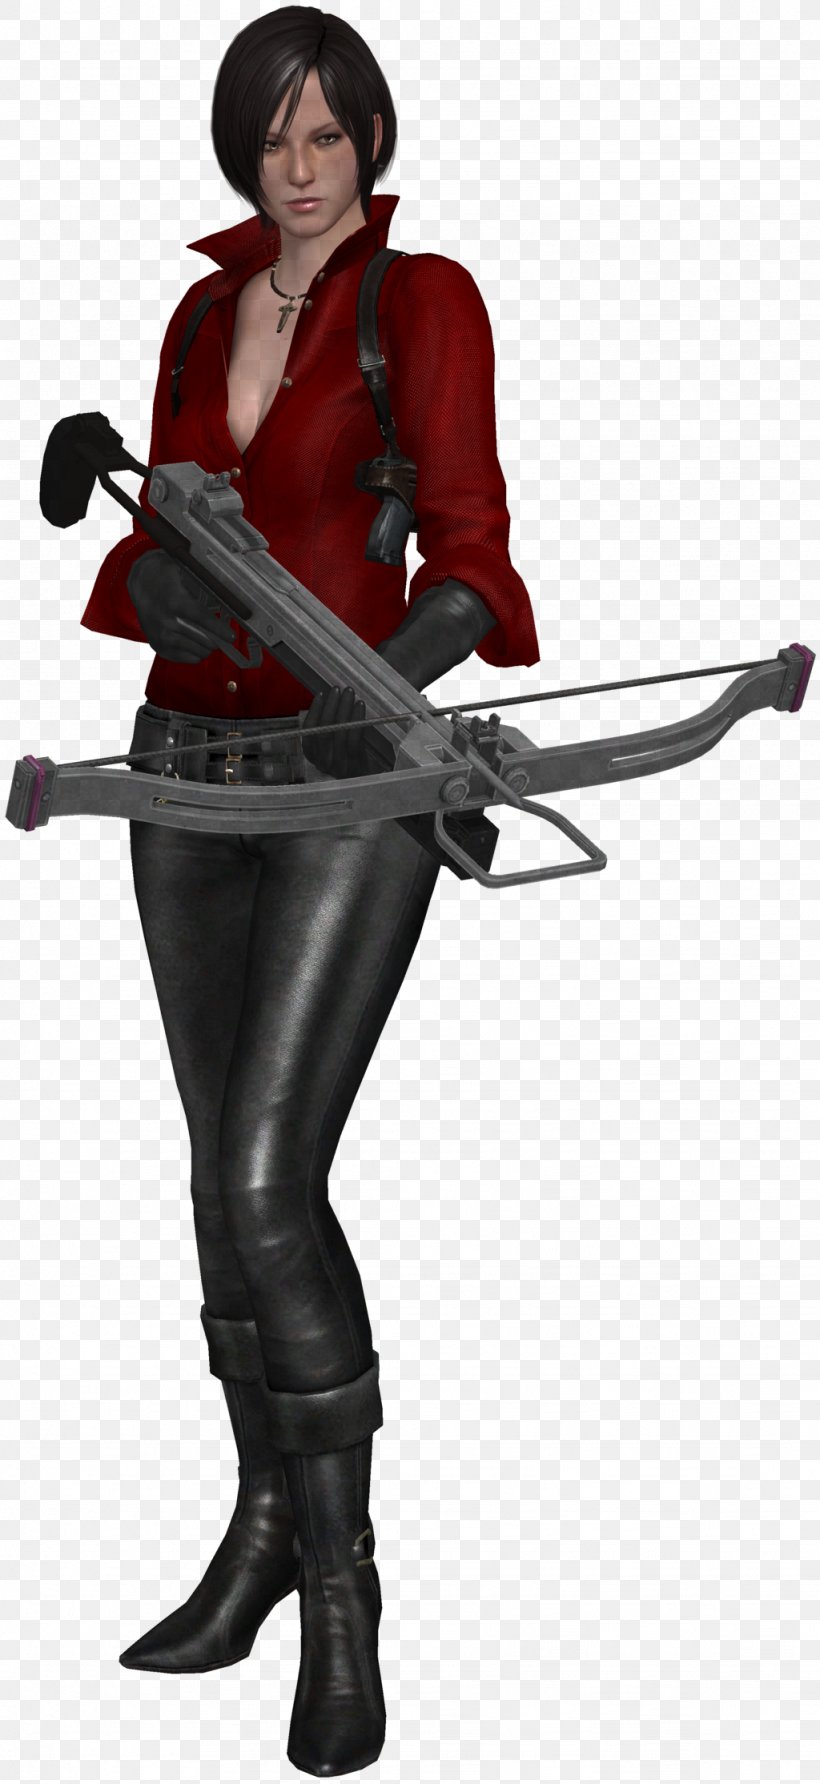 Ada Wong Resident Evil 6 Resident Evil 4 Leon S. Kennedy Video Game, PNG, 1024x2229px, Ada Wong, Art, Character, Cold Weapon, Costume Download Free